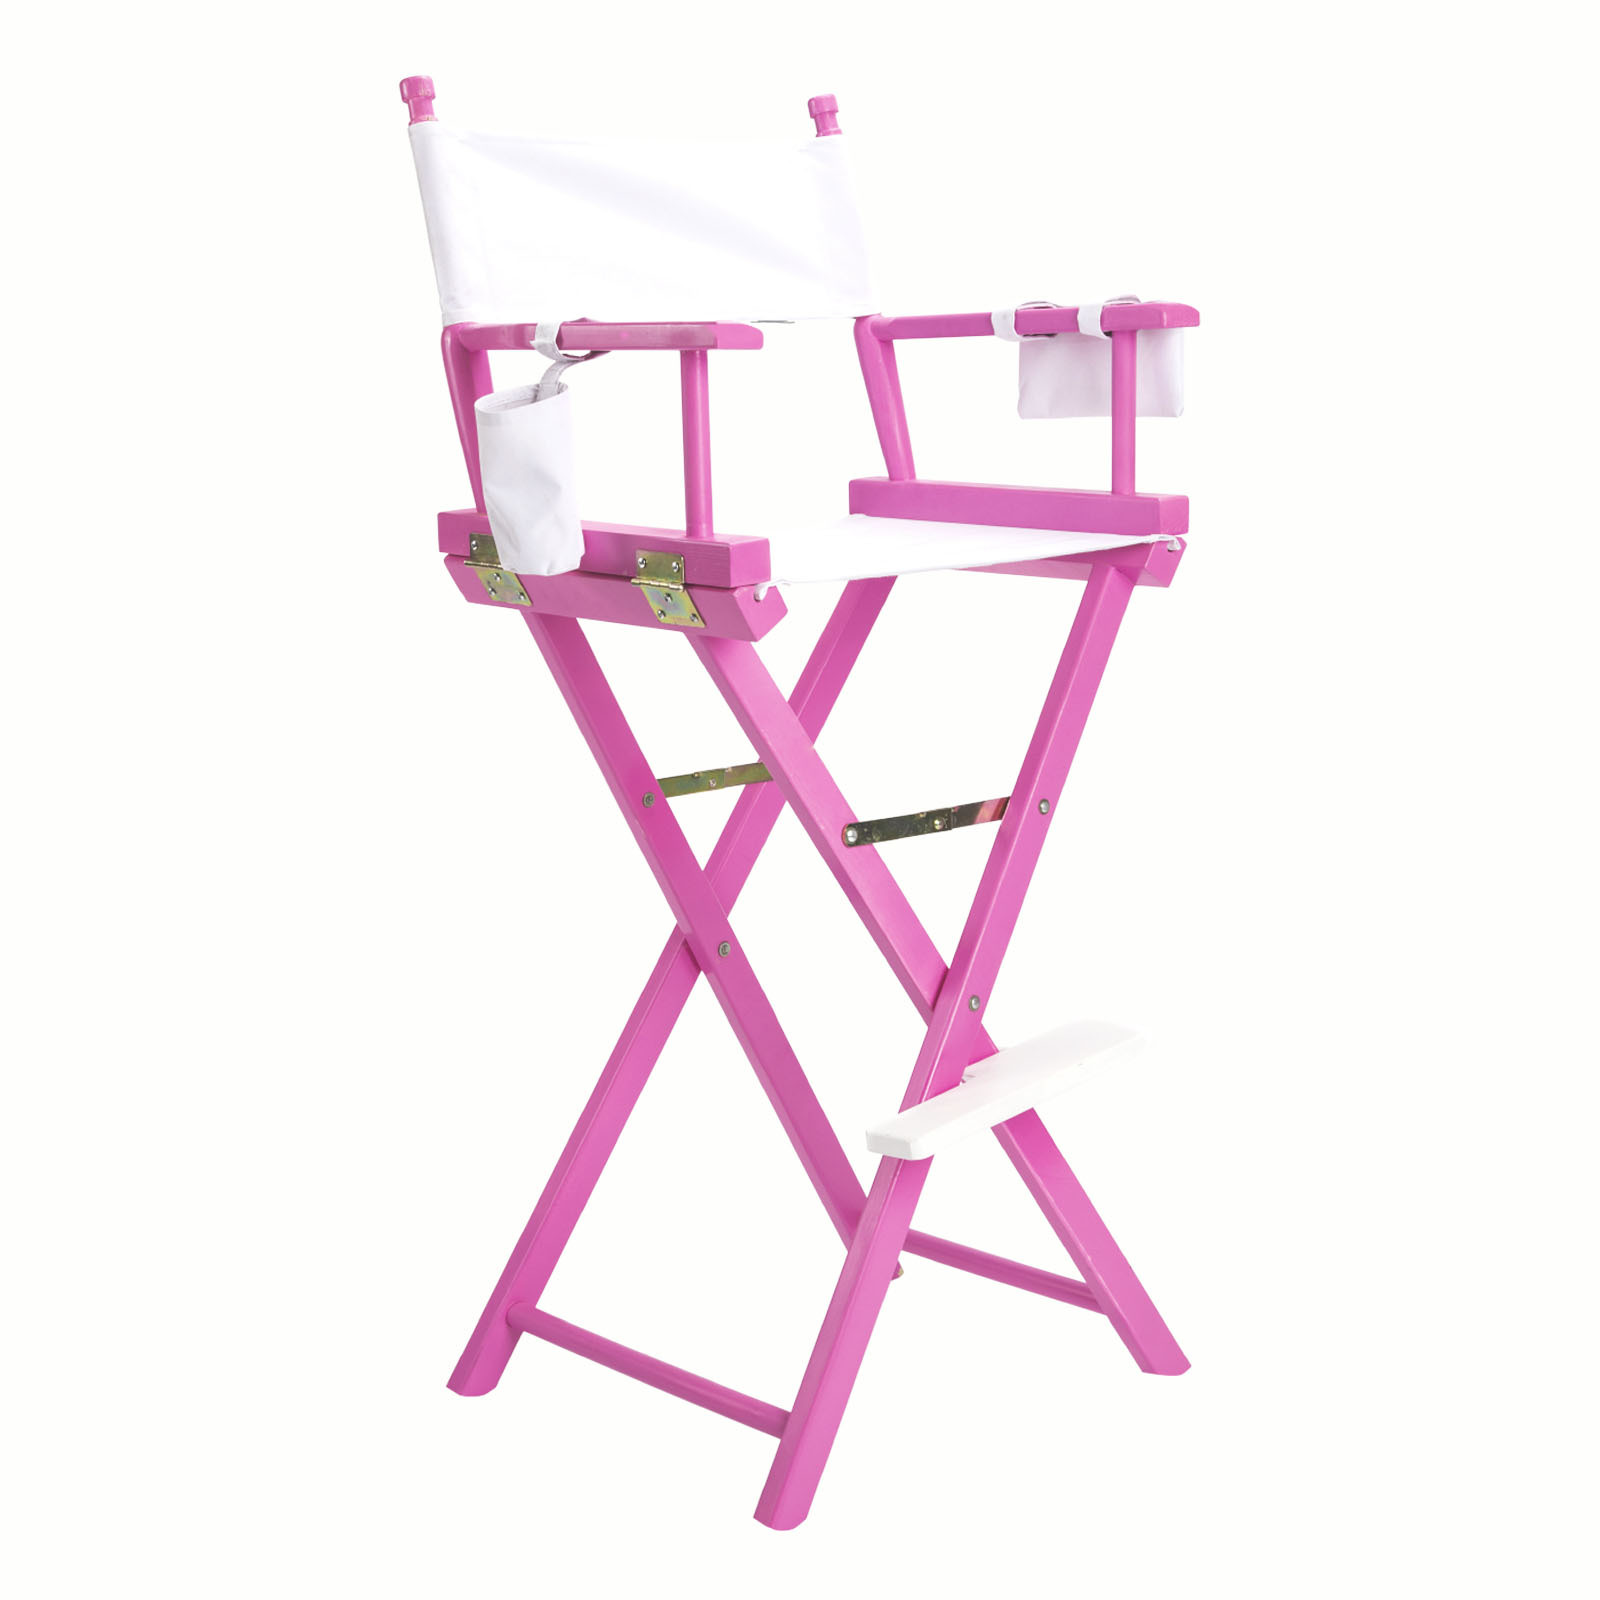 75cm Tall Director Chair - PINK HUMOR